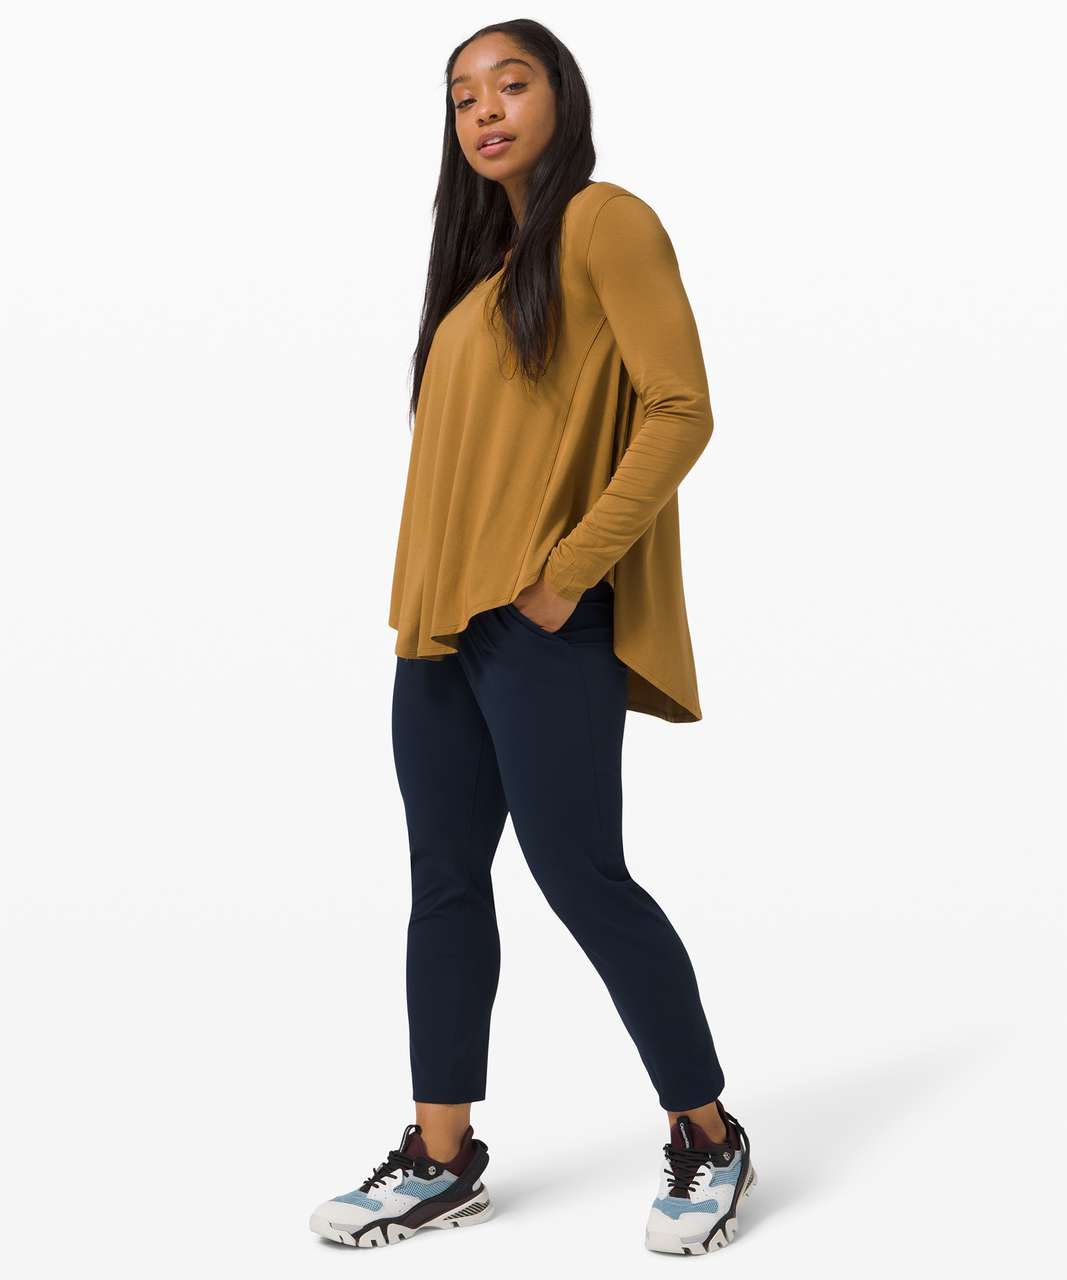 Lululemon Fast and Free leggings in Spiced Bronze